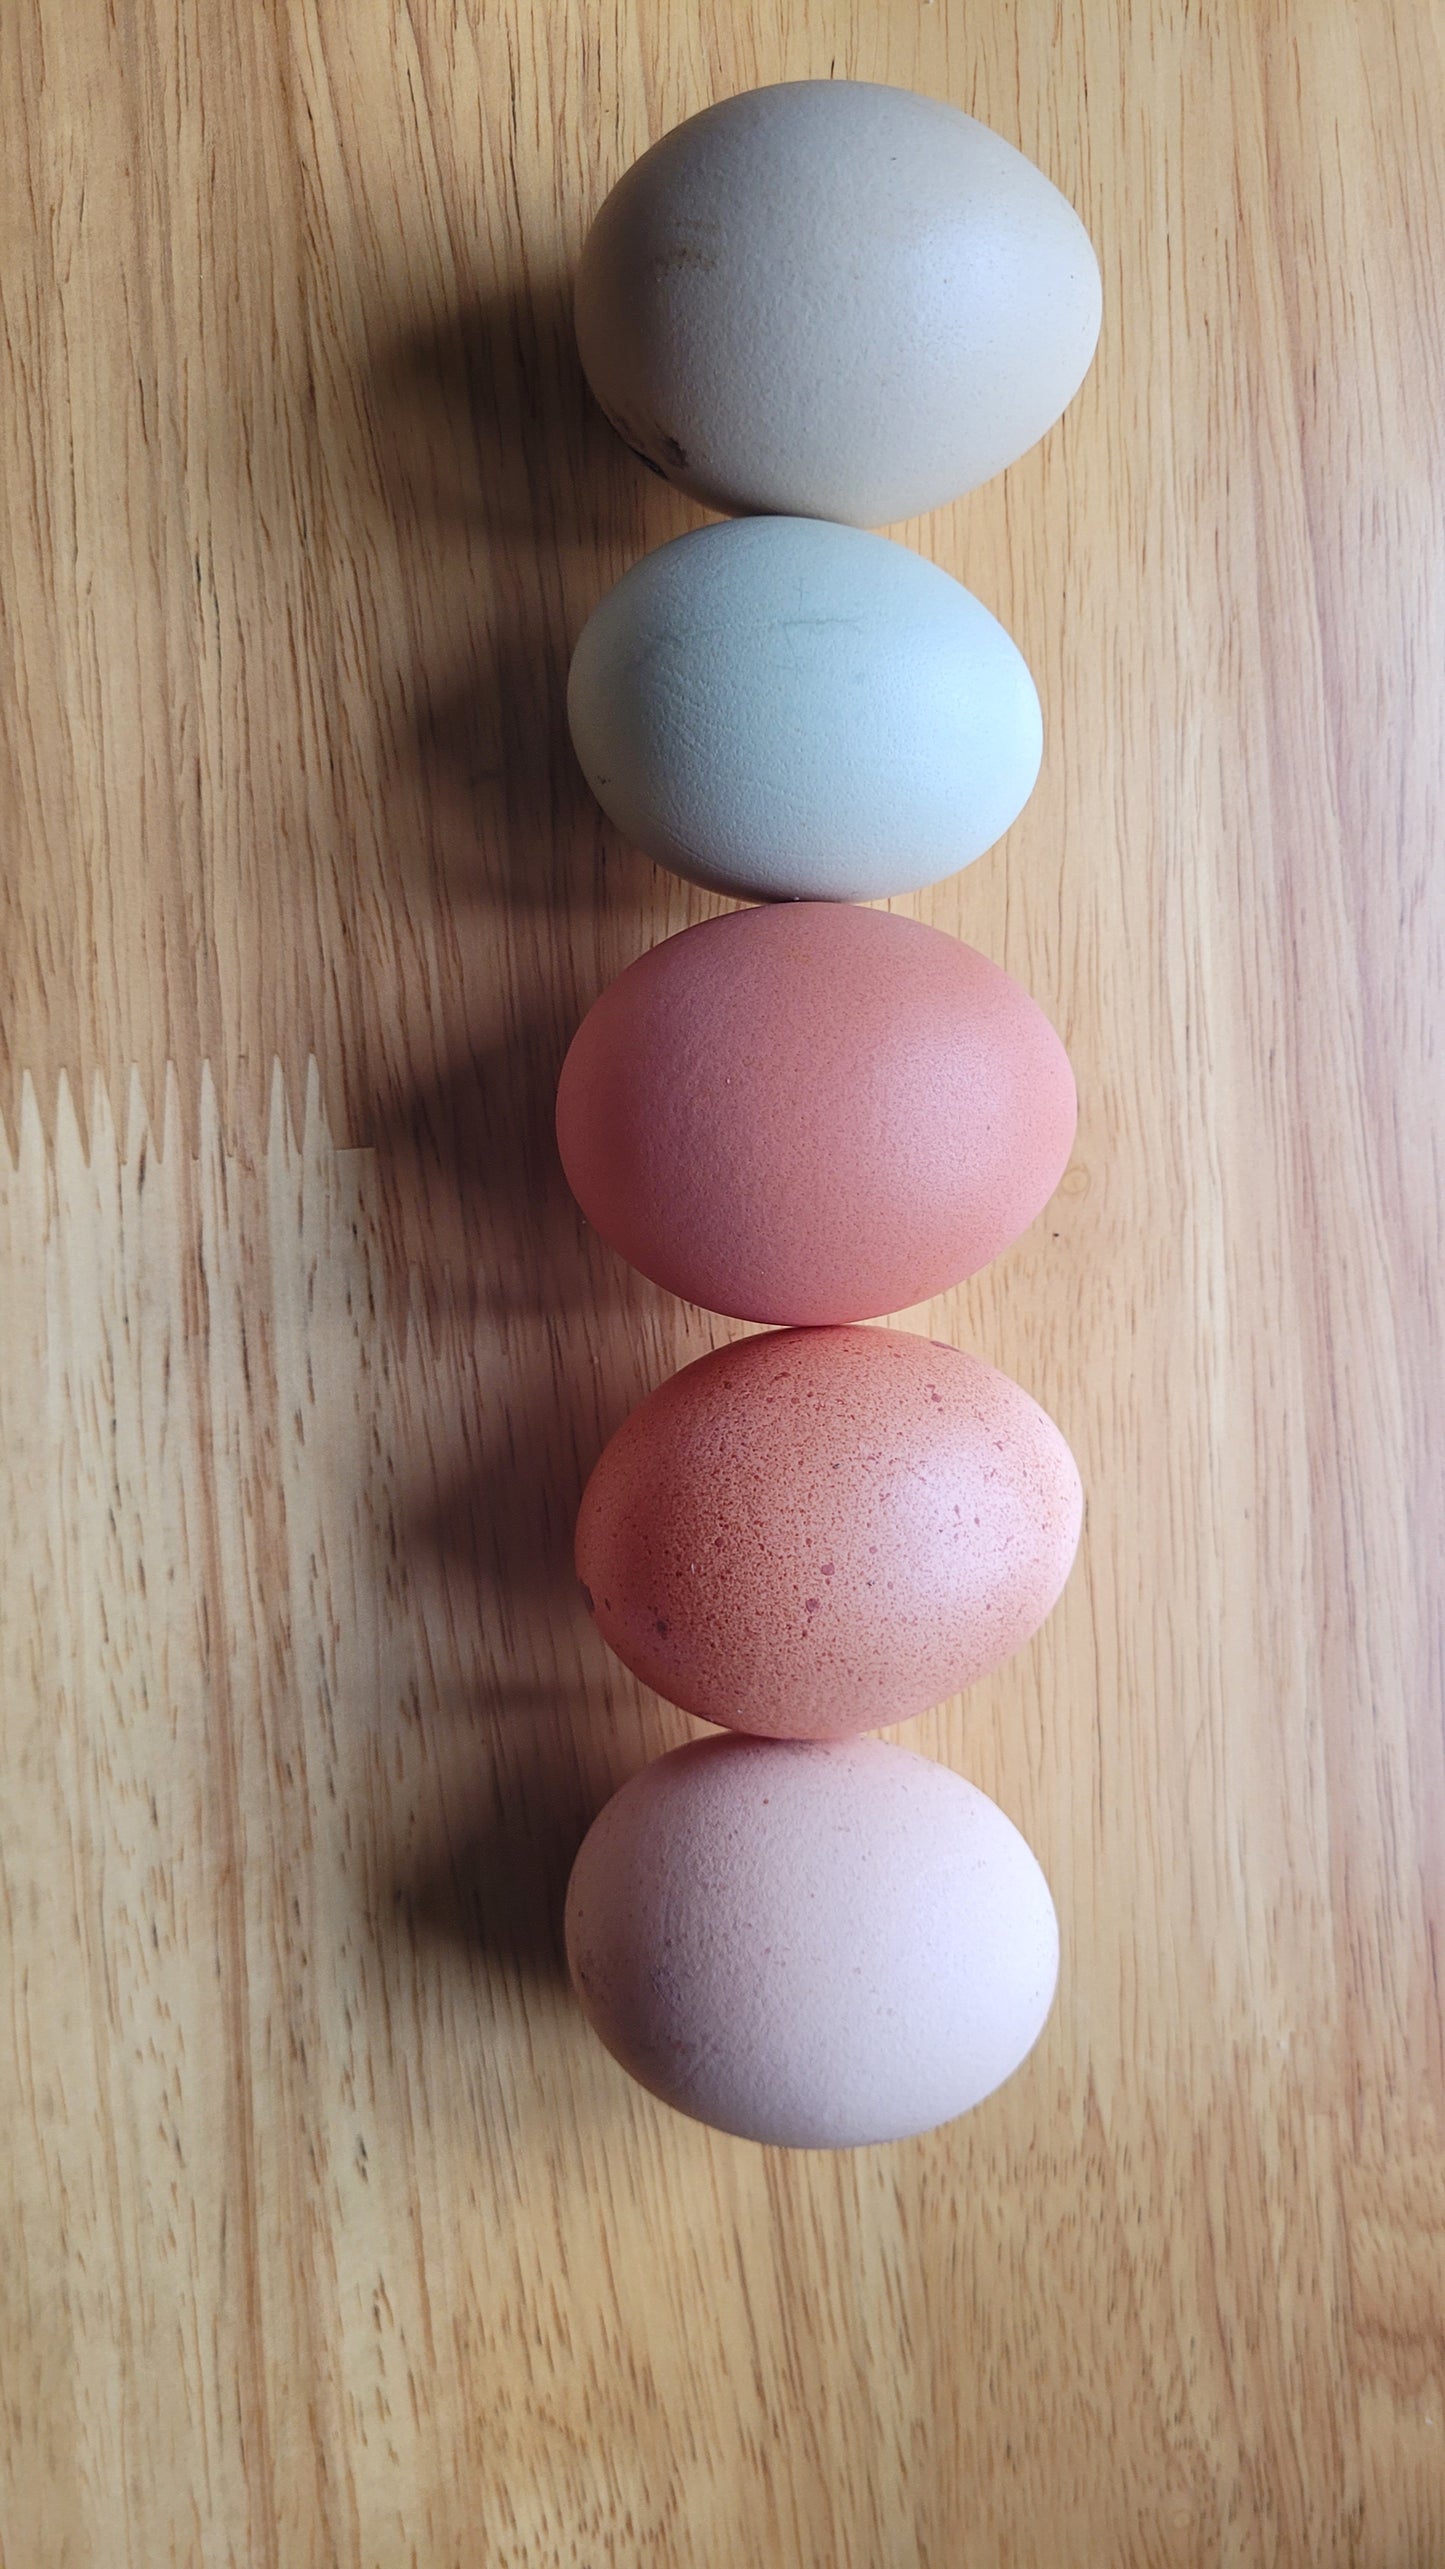 Hybid hatching eggs, choose your colour.